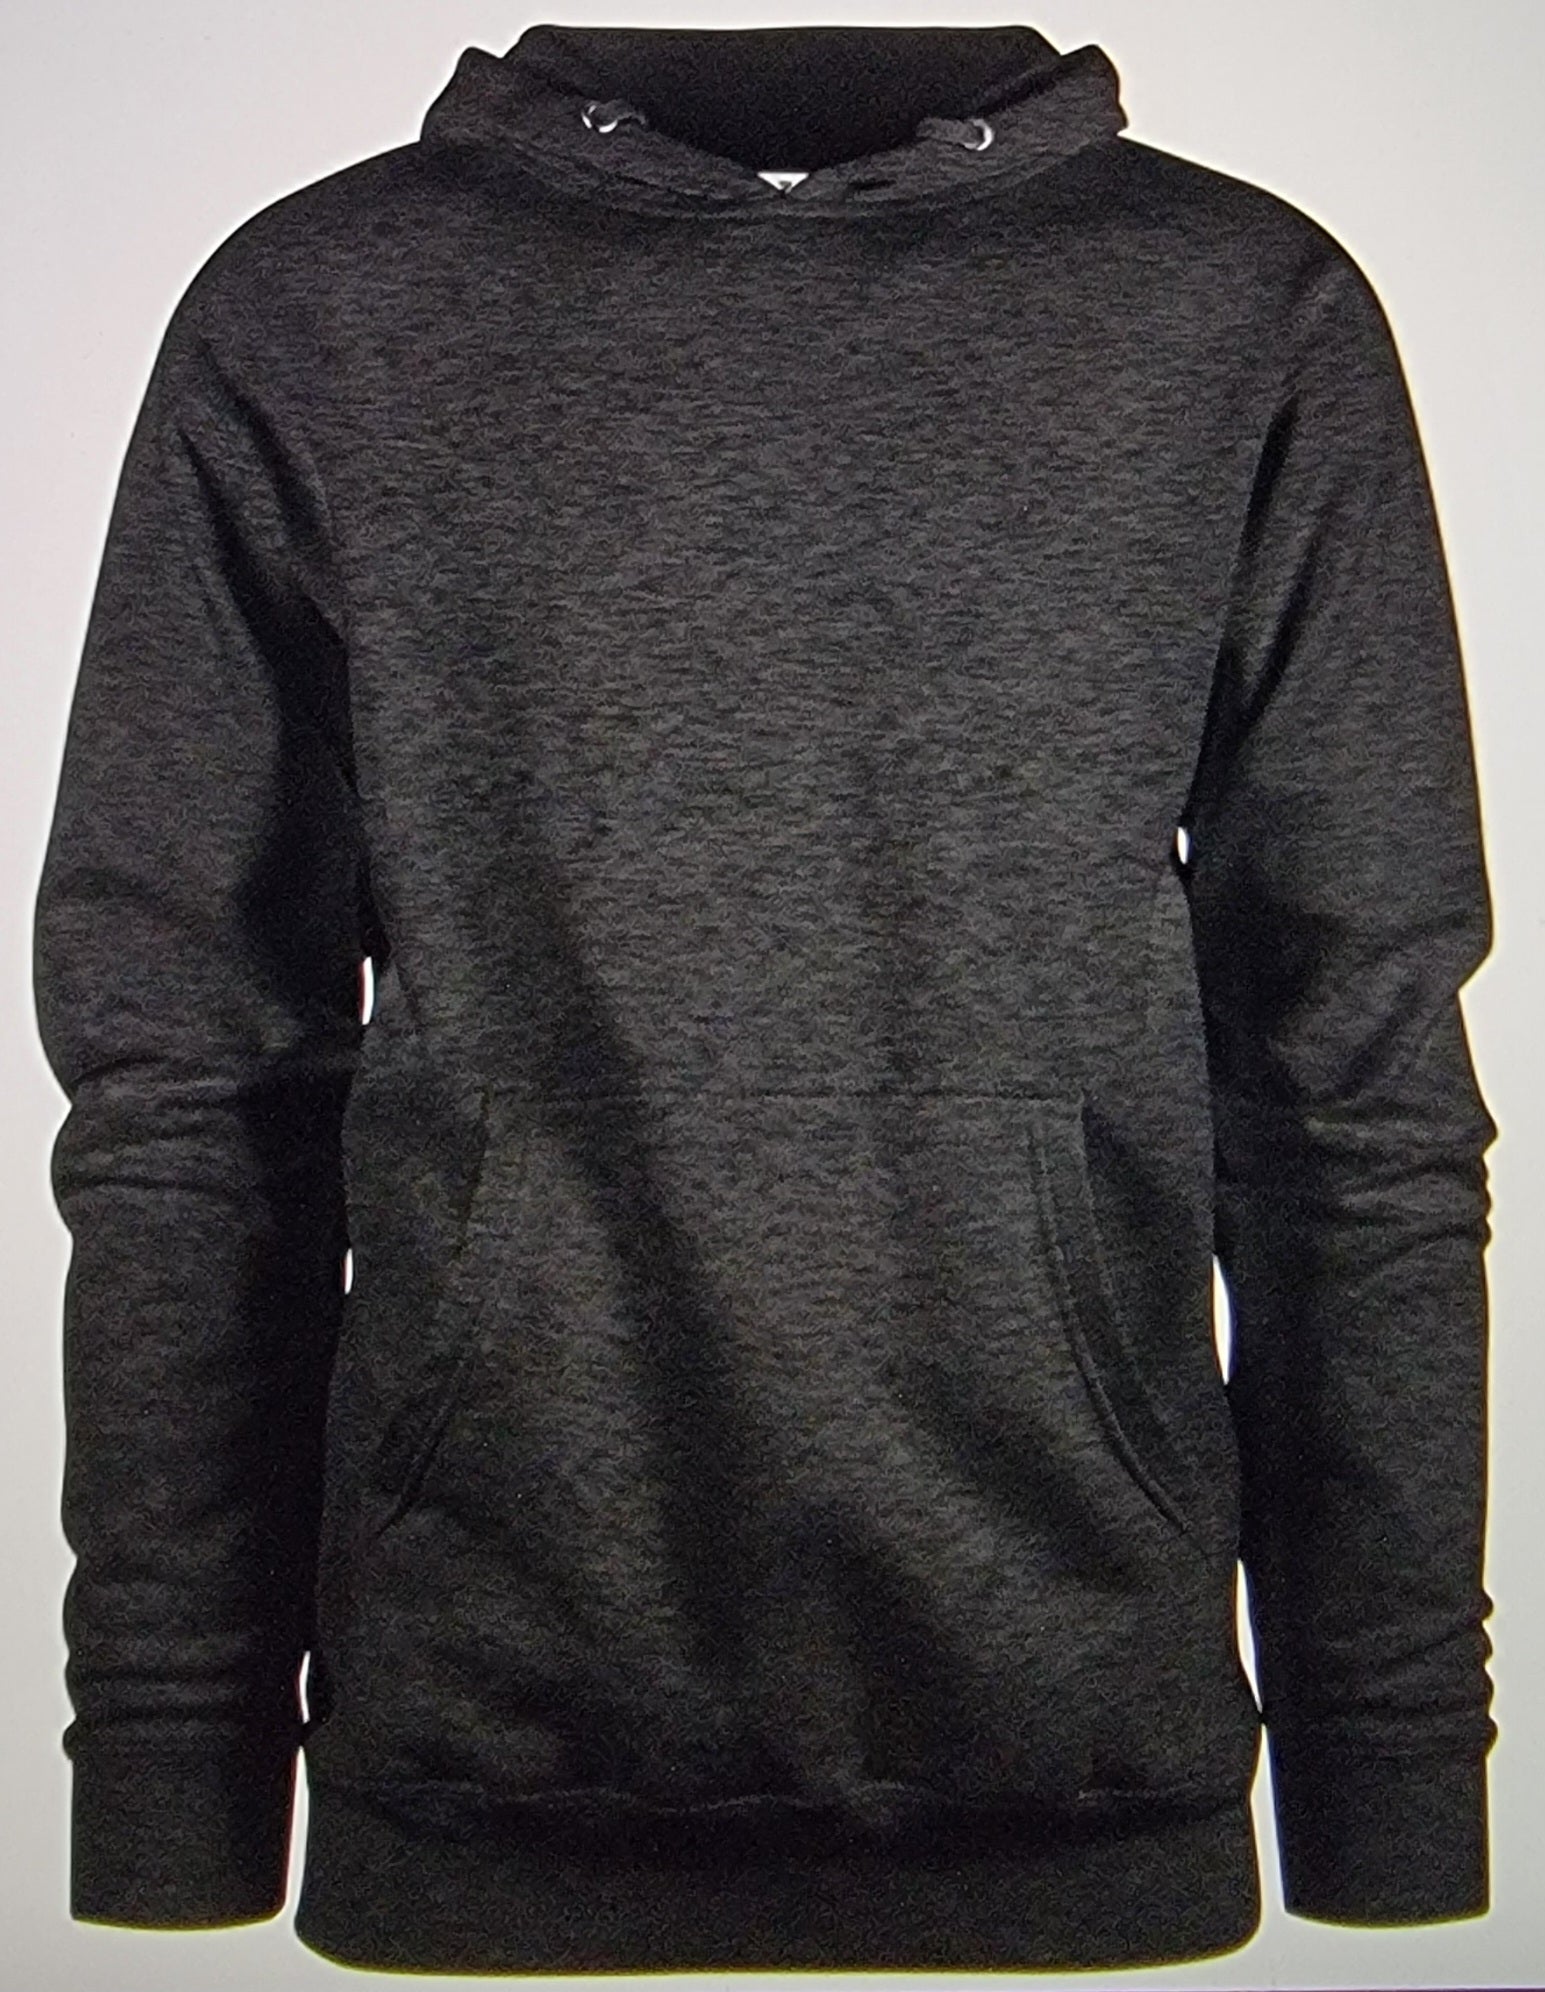 2 Sweater Long sleeve pull over